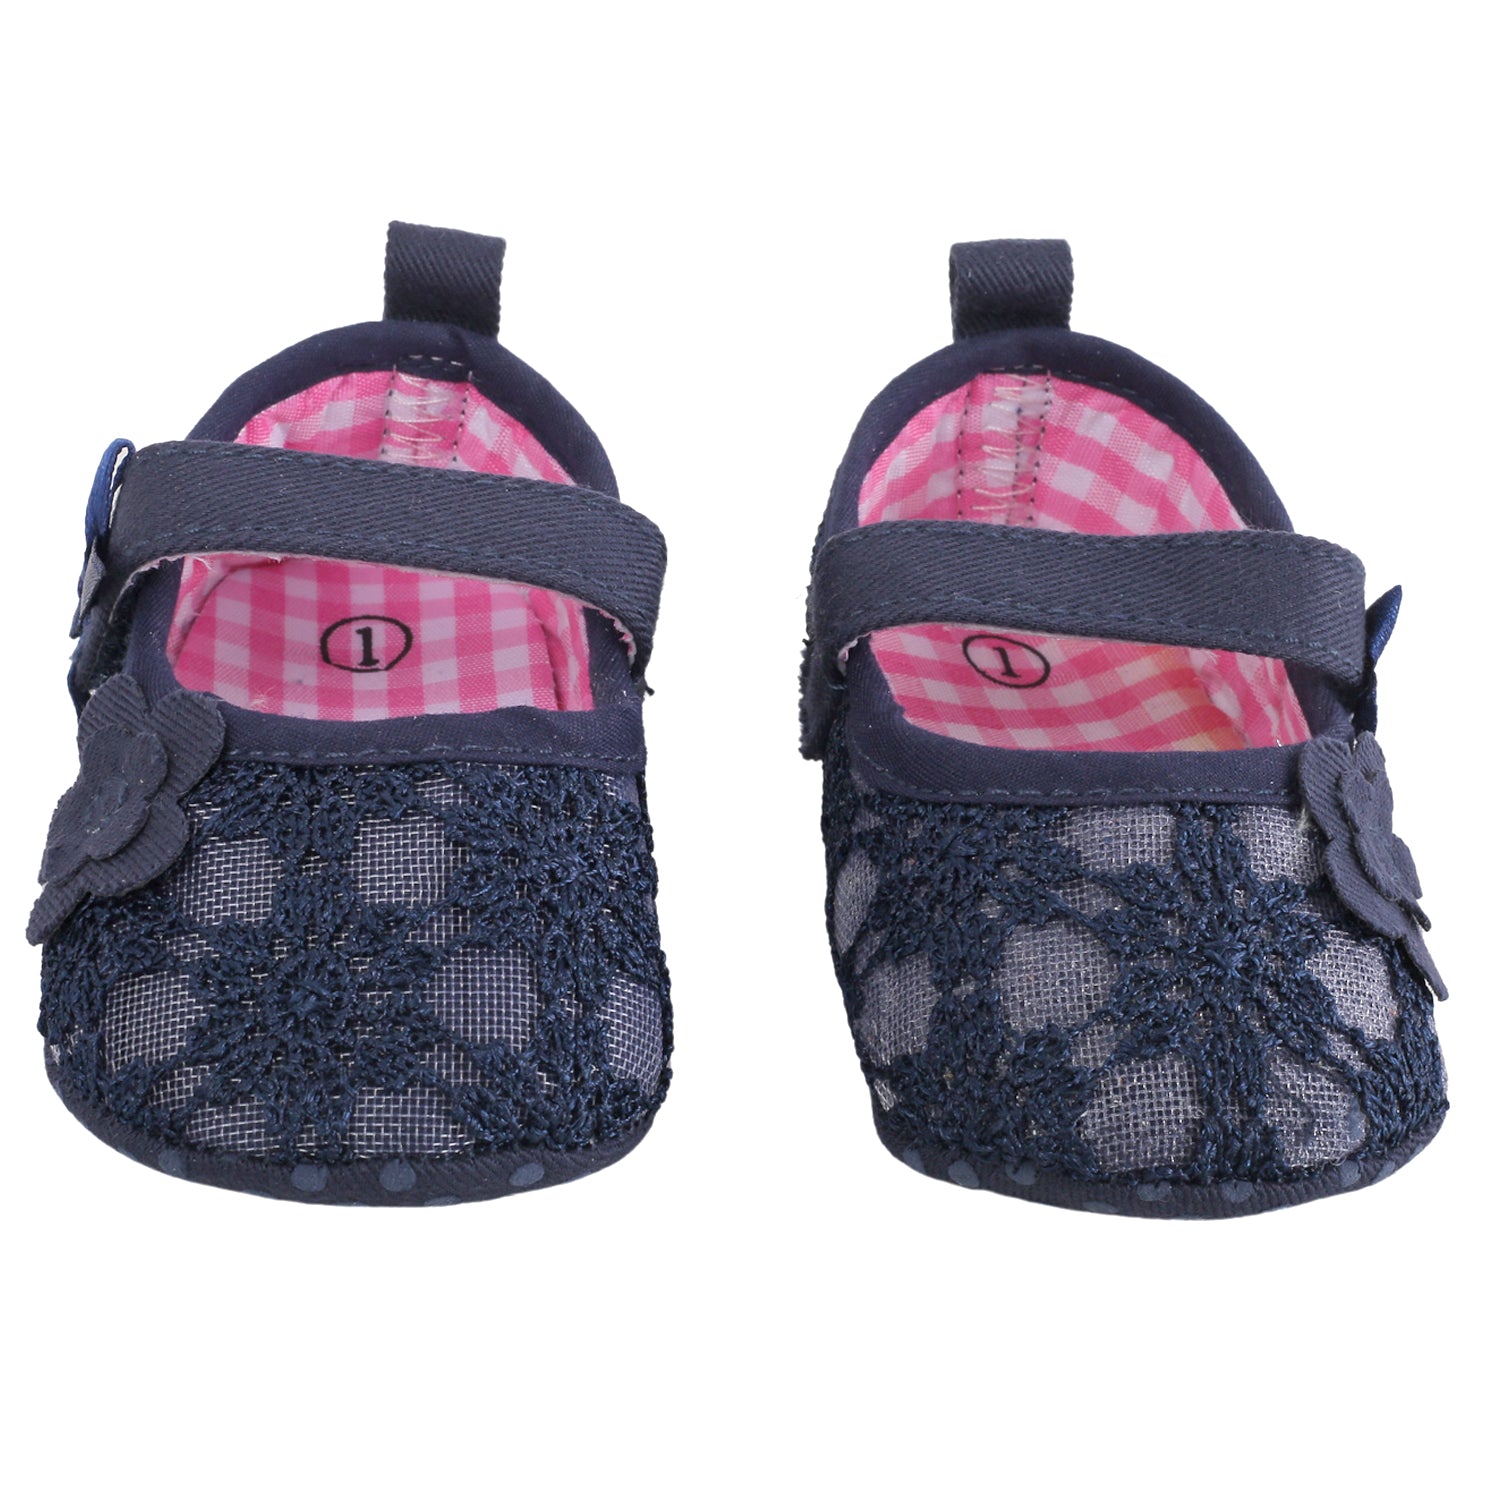 Baby Moo Floral Lace Blue Booties - Baby Moo